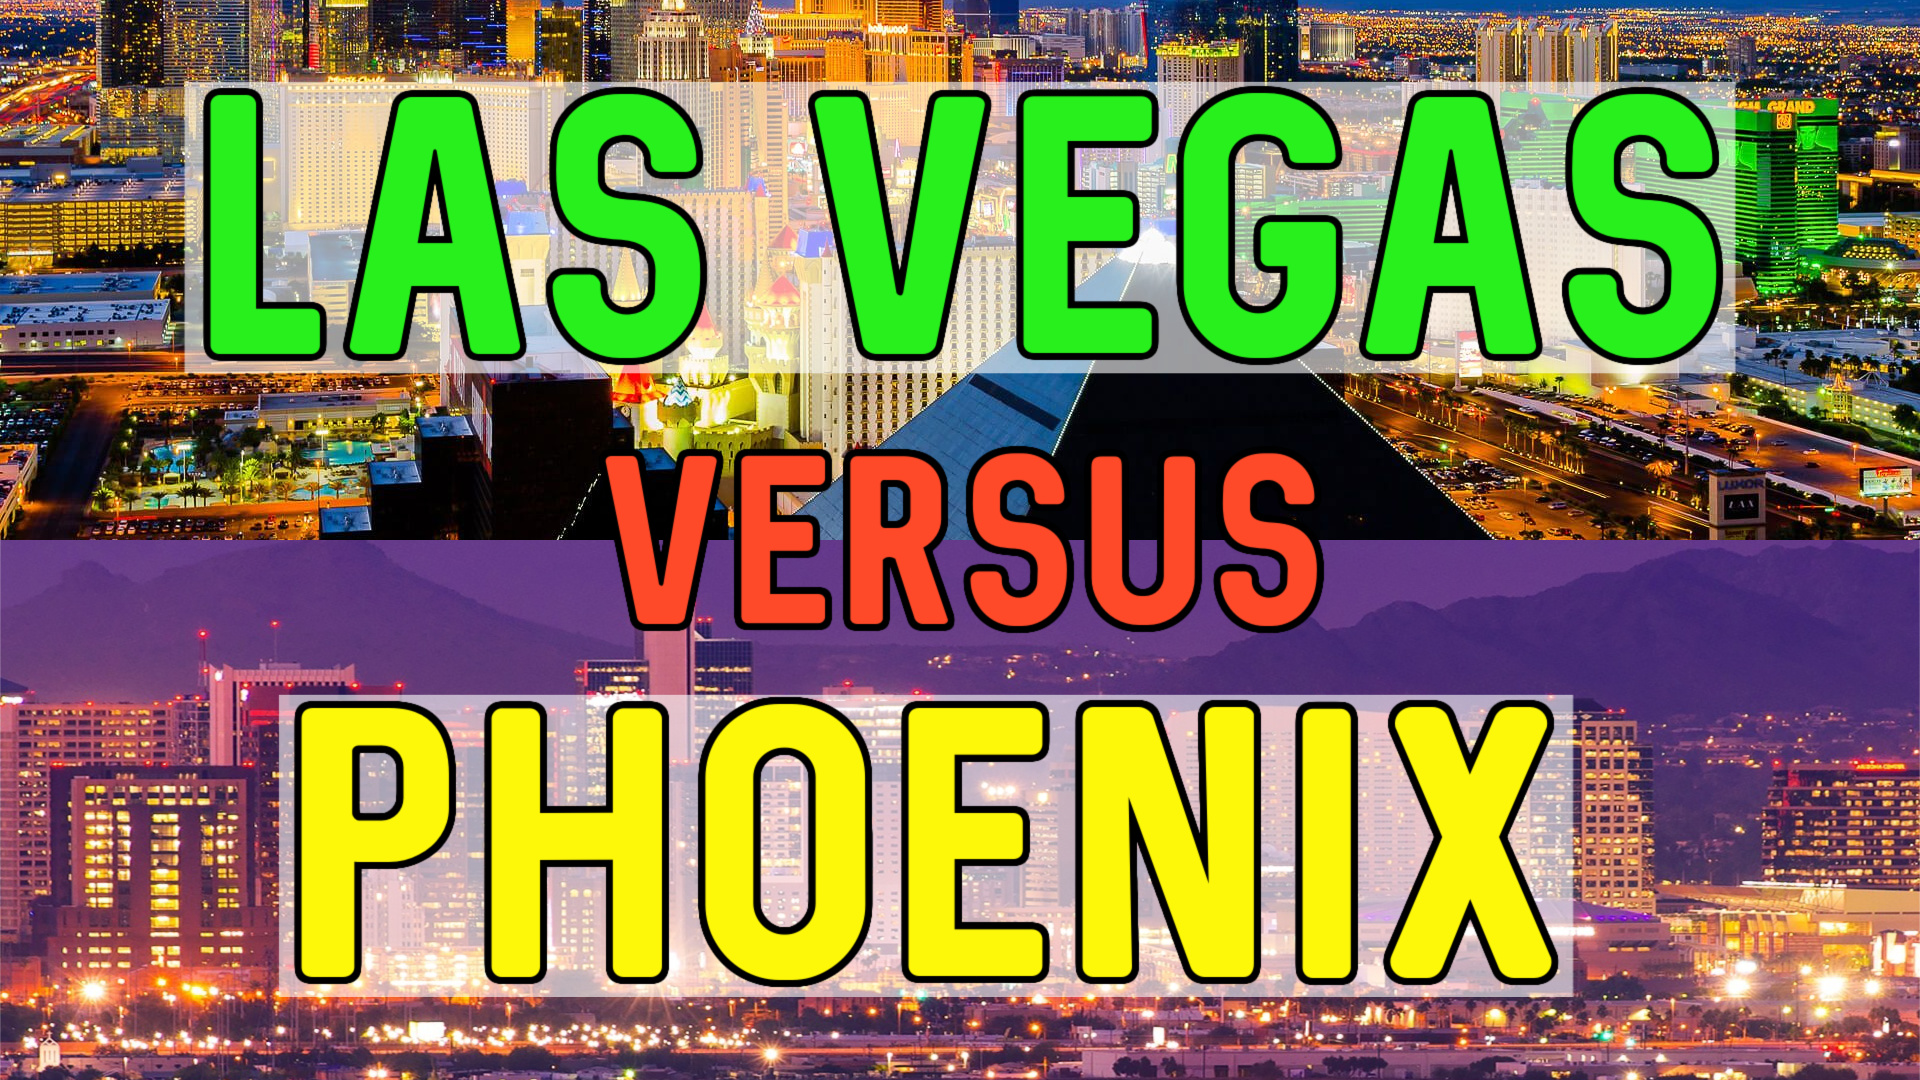 Living in Las Vegas VS Living in Phoenix - What's the Difference?